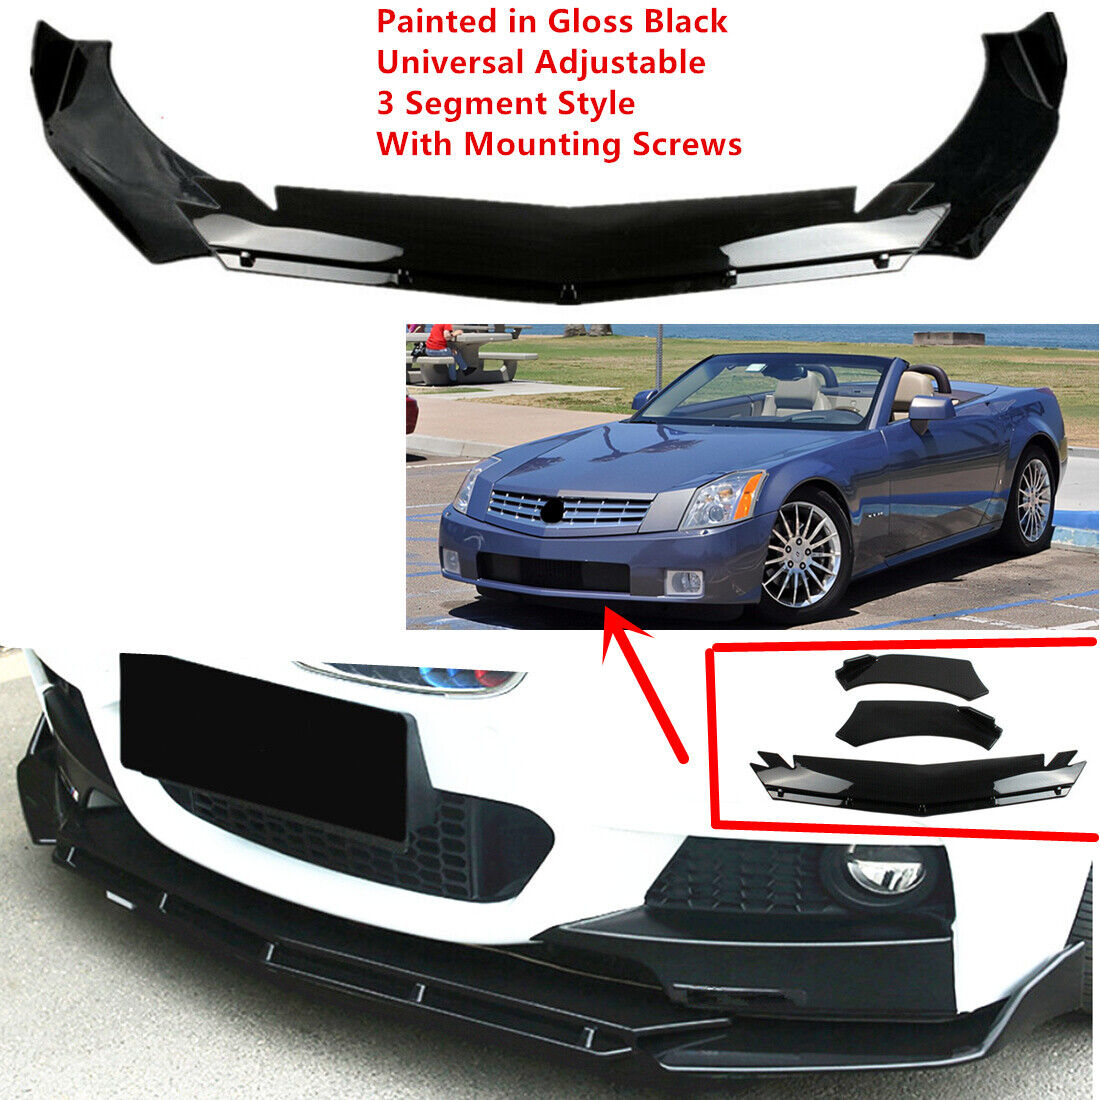 Add-on Universal Fit For Cadillac XLR 2004-2009 Front Underbody Lip Spoiler Wing